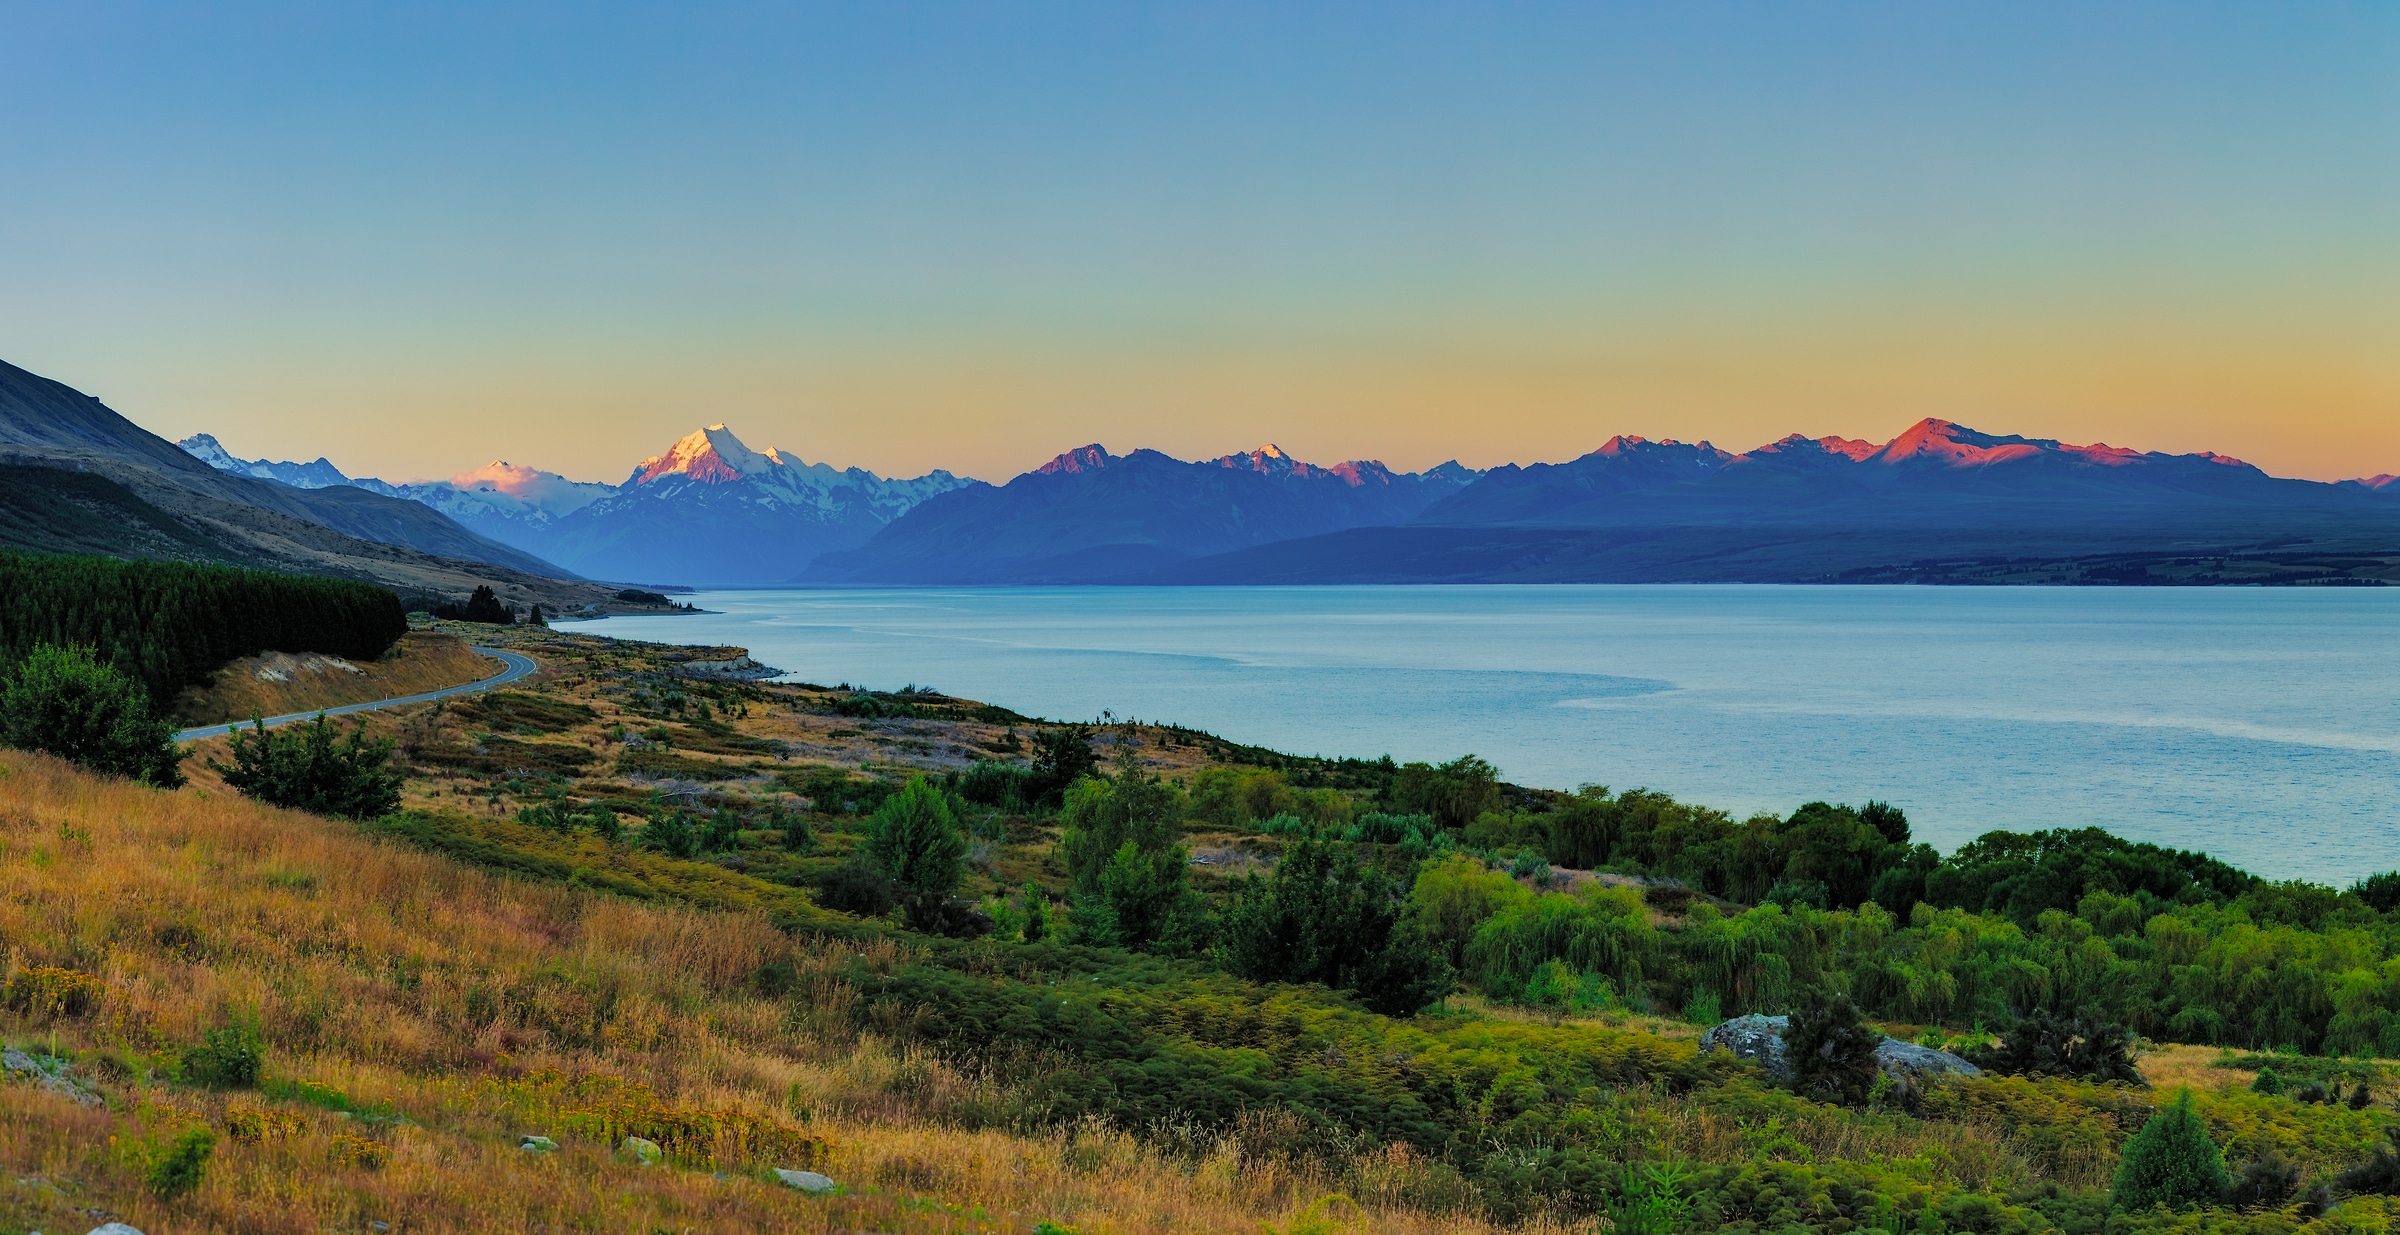 197 megapixels! A very high resolution, large-format VAST photo print of sunset over Lake Pukaki with mountains in the background; landscape photograph created by John Freeman in Mount Cook Road, Ben Ohau 7999, New Zealand